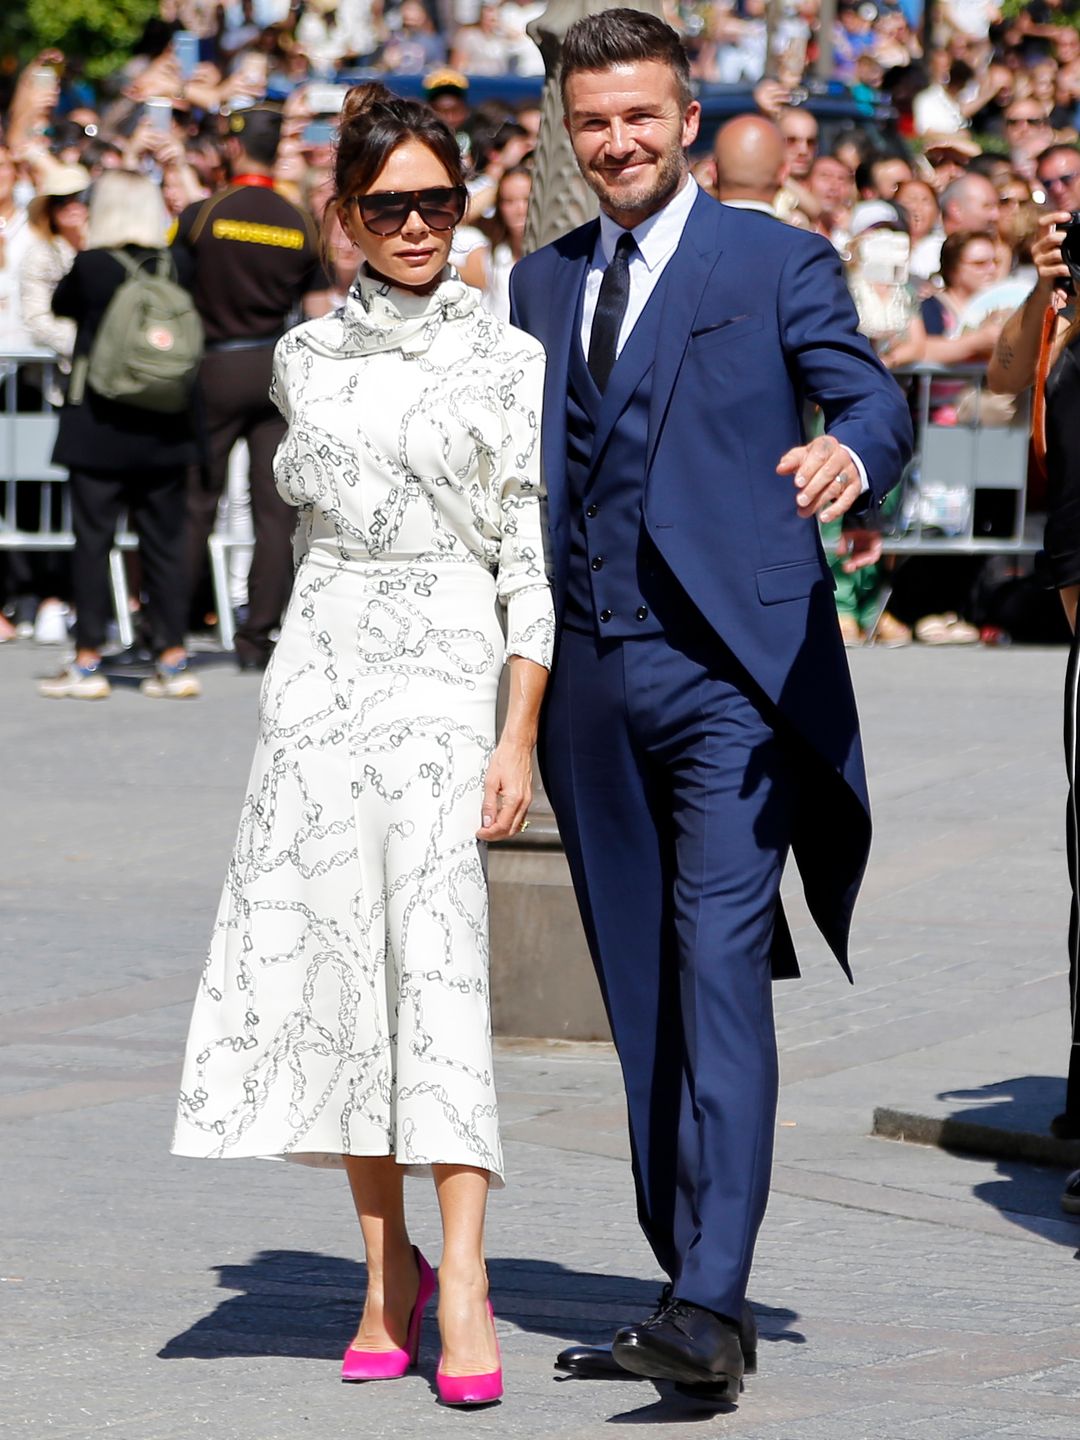 David and Victoria Beckham stood outside in the sun